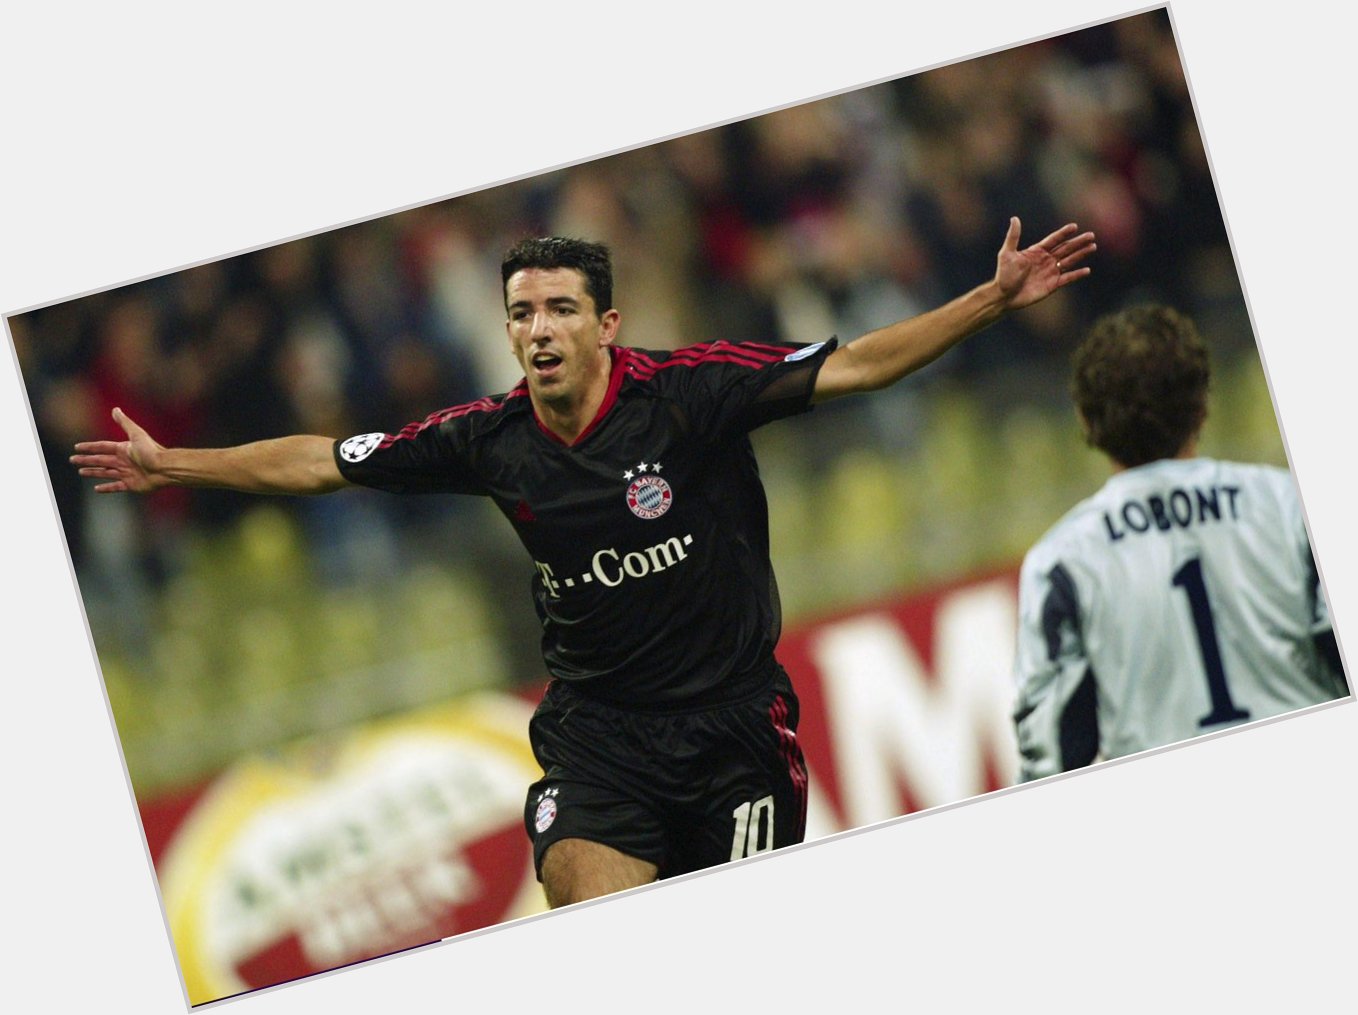 Happy birthday to the man with the fastest goal in history - former striker Roy Makaay! 